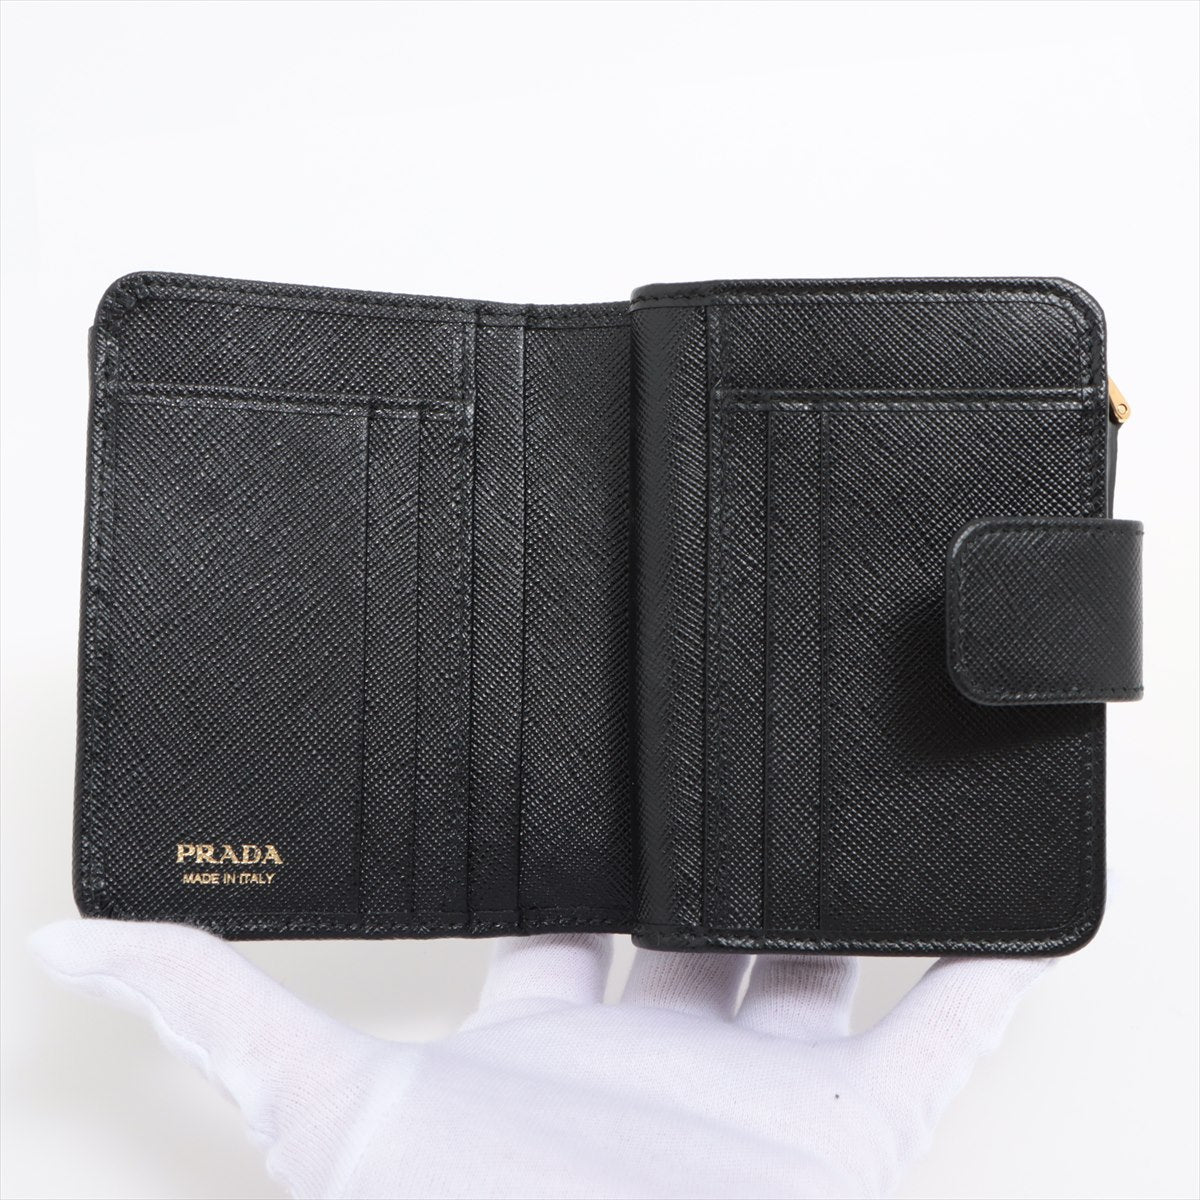 Prada Saffiano Triang 1ML018 Leather Compact Wallet Black